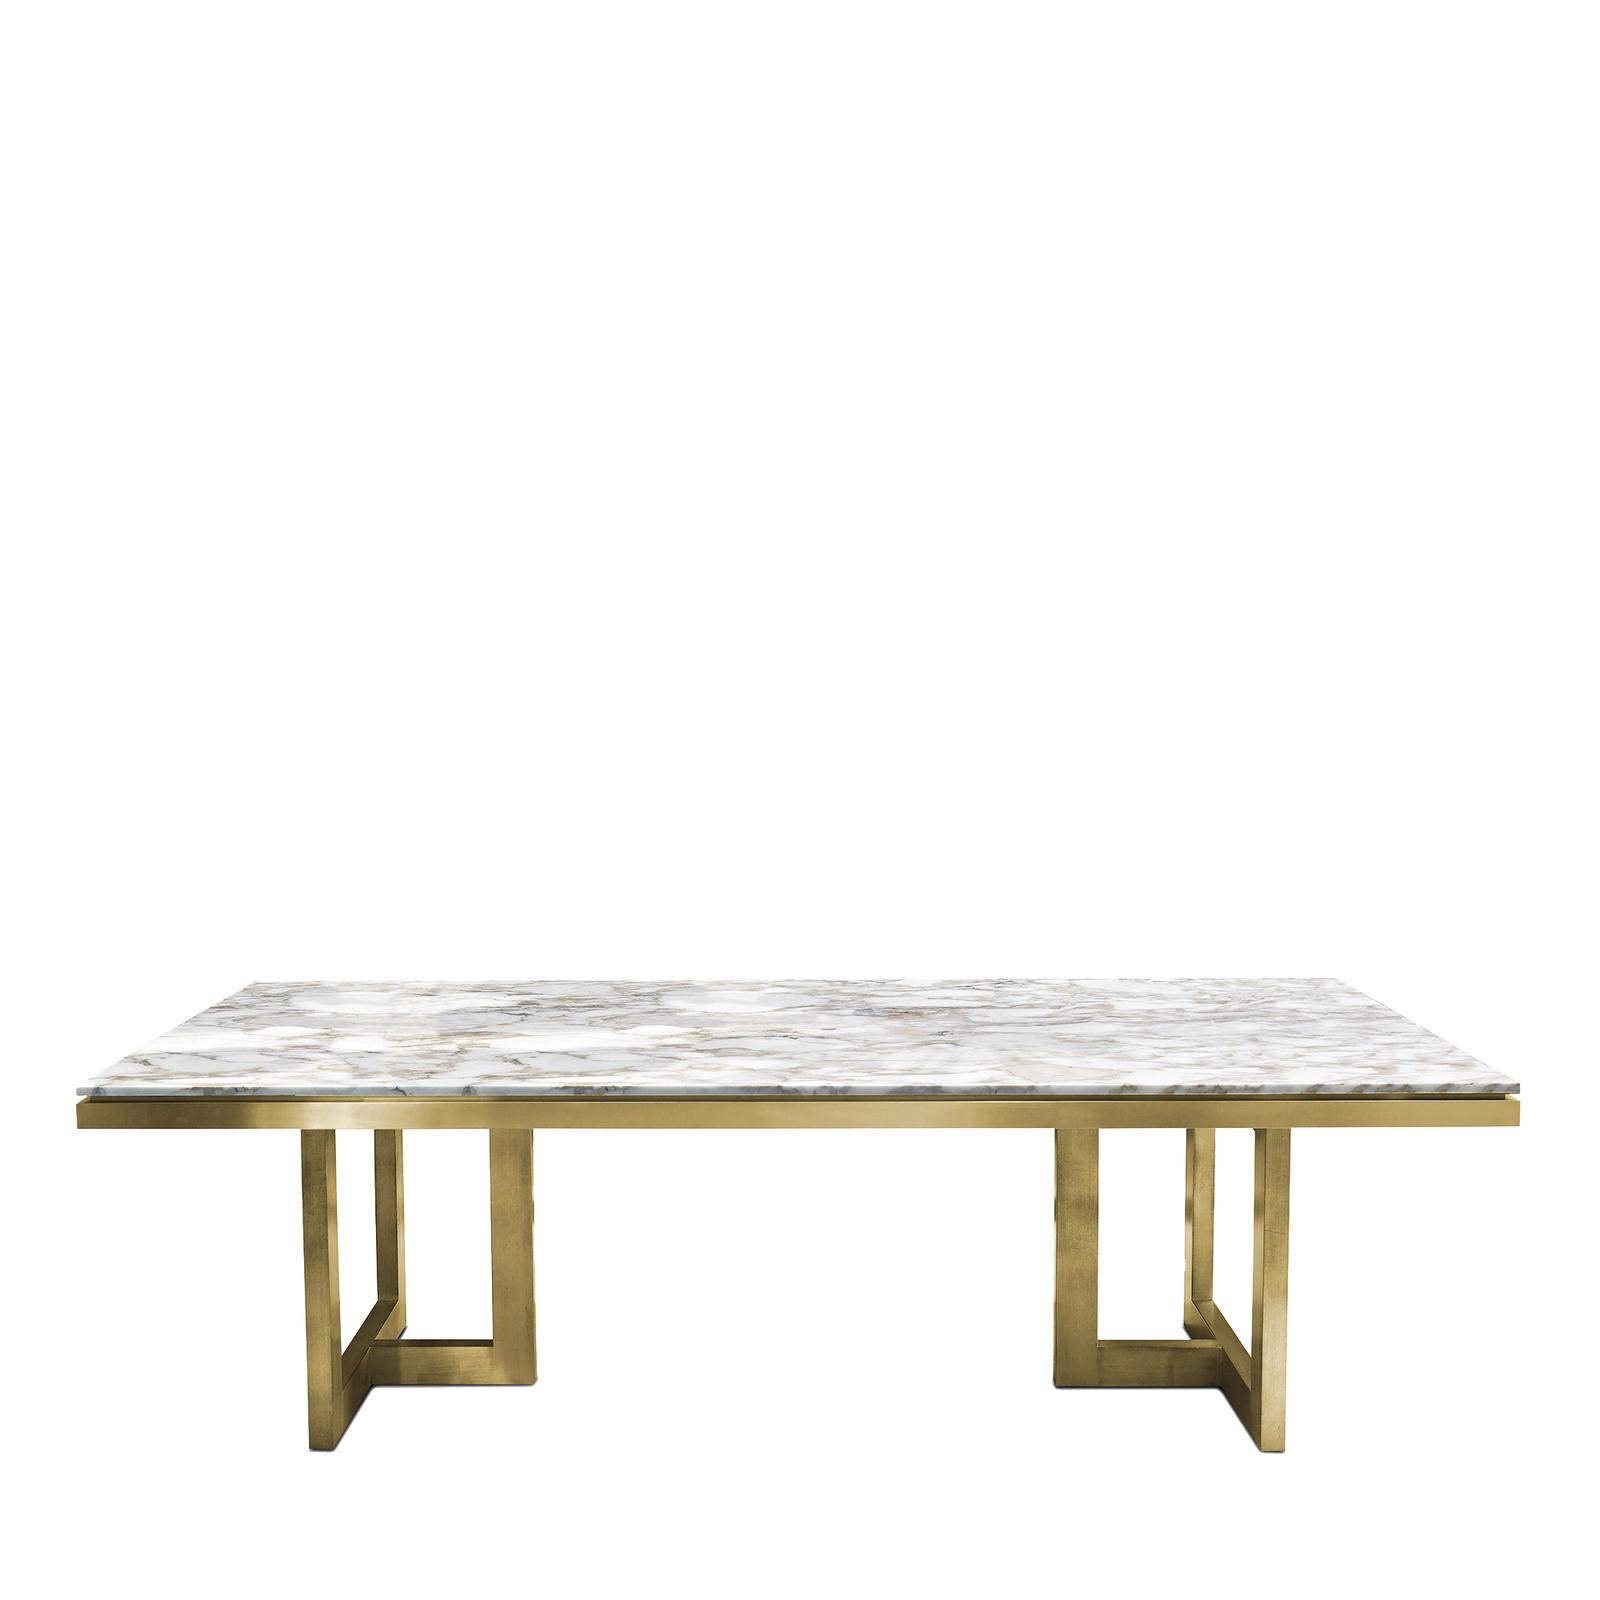 Timeless and majestic, this dining table is a one of a kind, superb example of traditional craftsmanship, combined with the use of precious materials. The base in wood features two sets of feet with a lavish gold leaf that strikingly complements the